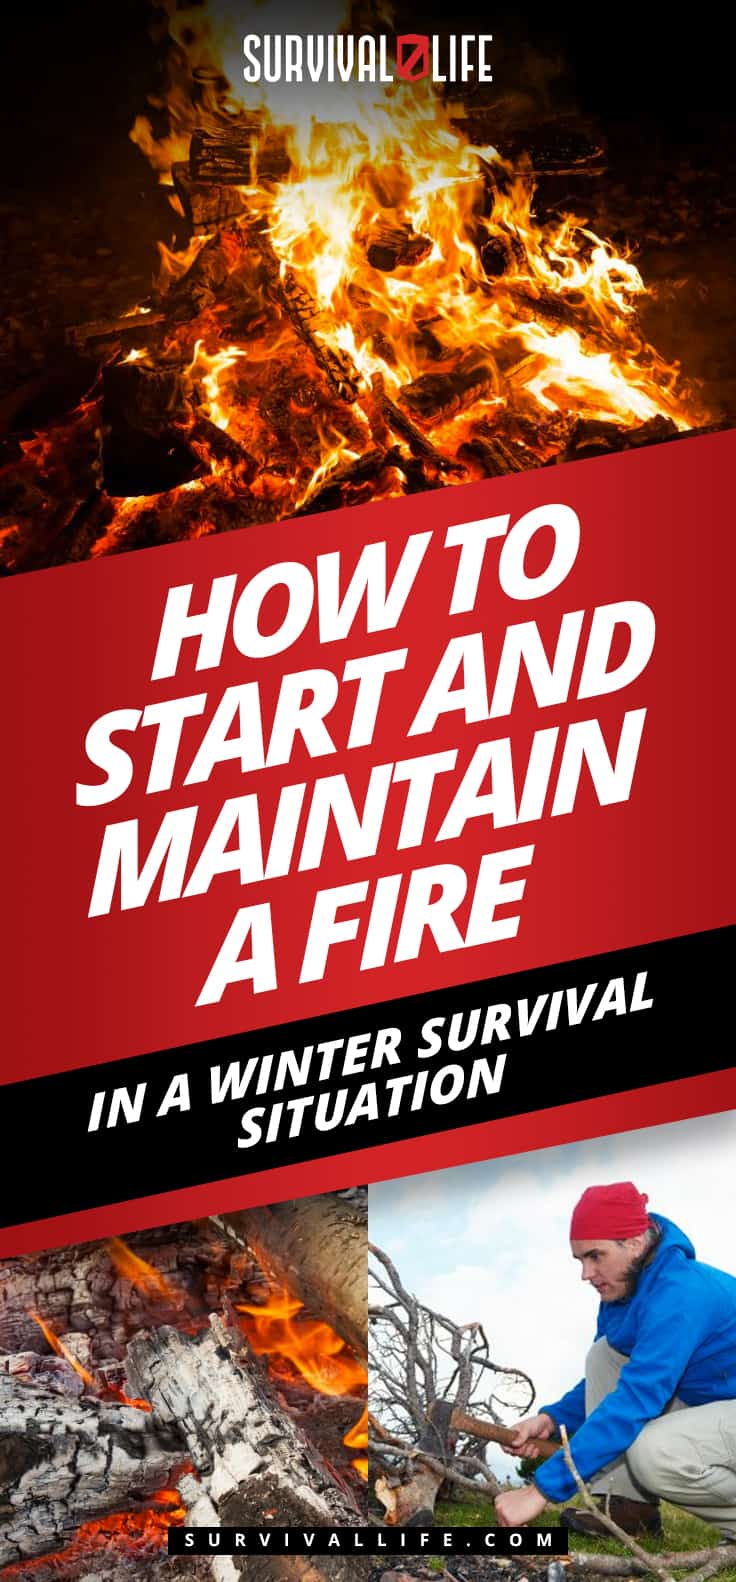 How To Start and Maintain a Fire in a Winter Survival Situation